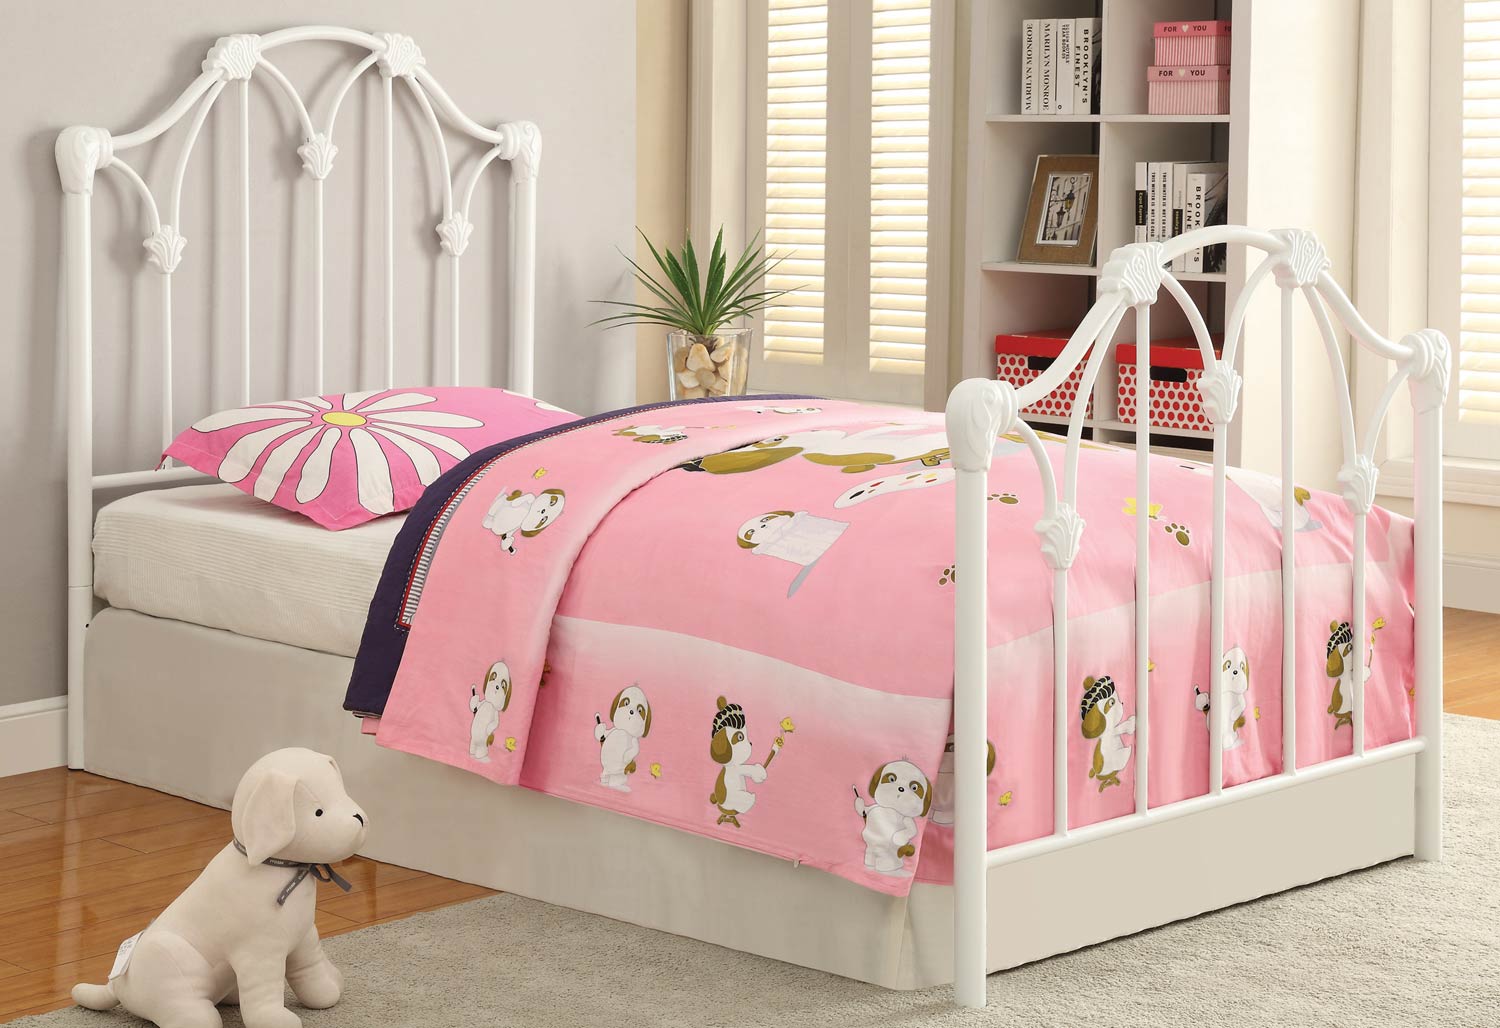 Coaster 300257 Youth Bed - White